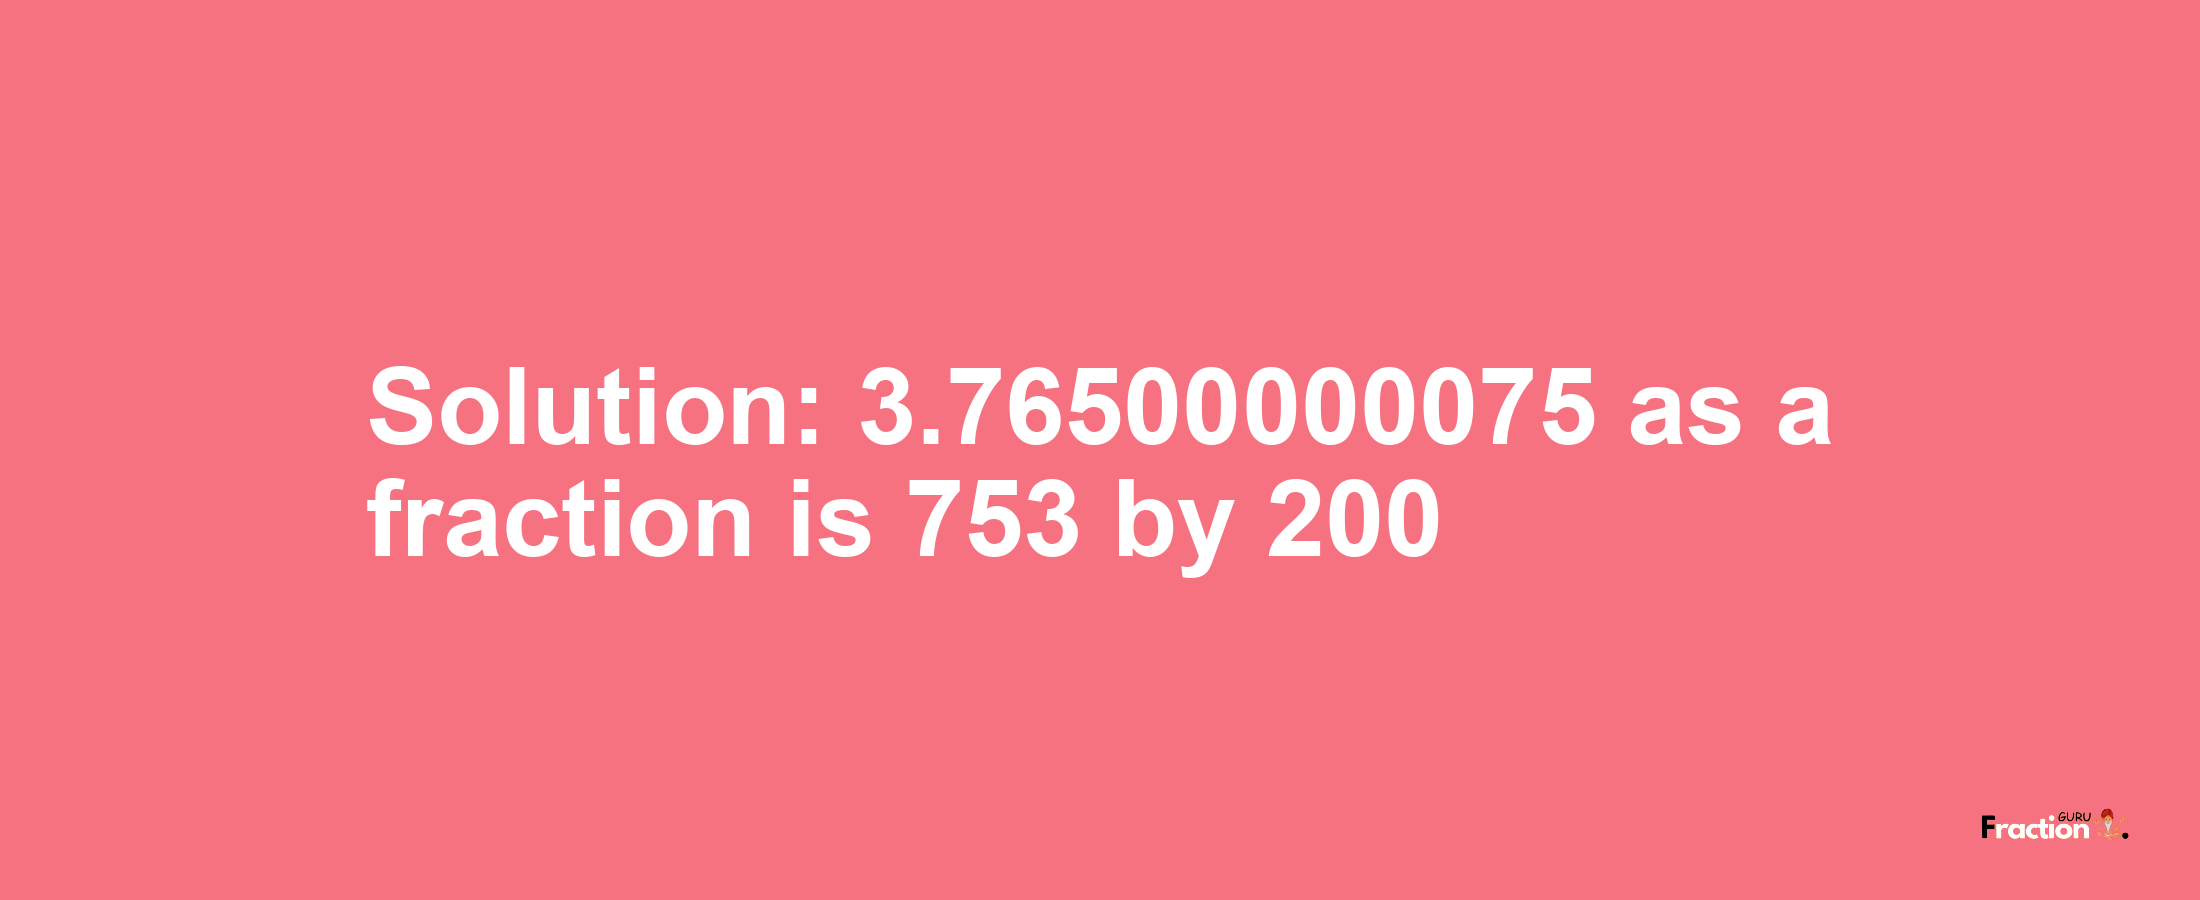 Solution:3.76500000075 as a fraction is 753/200